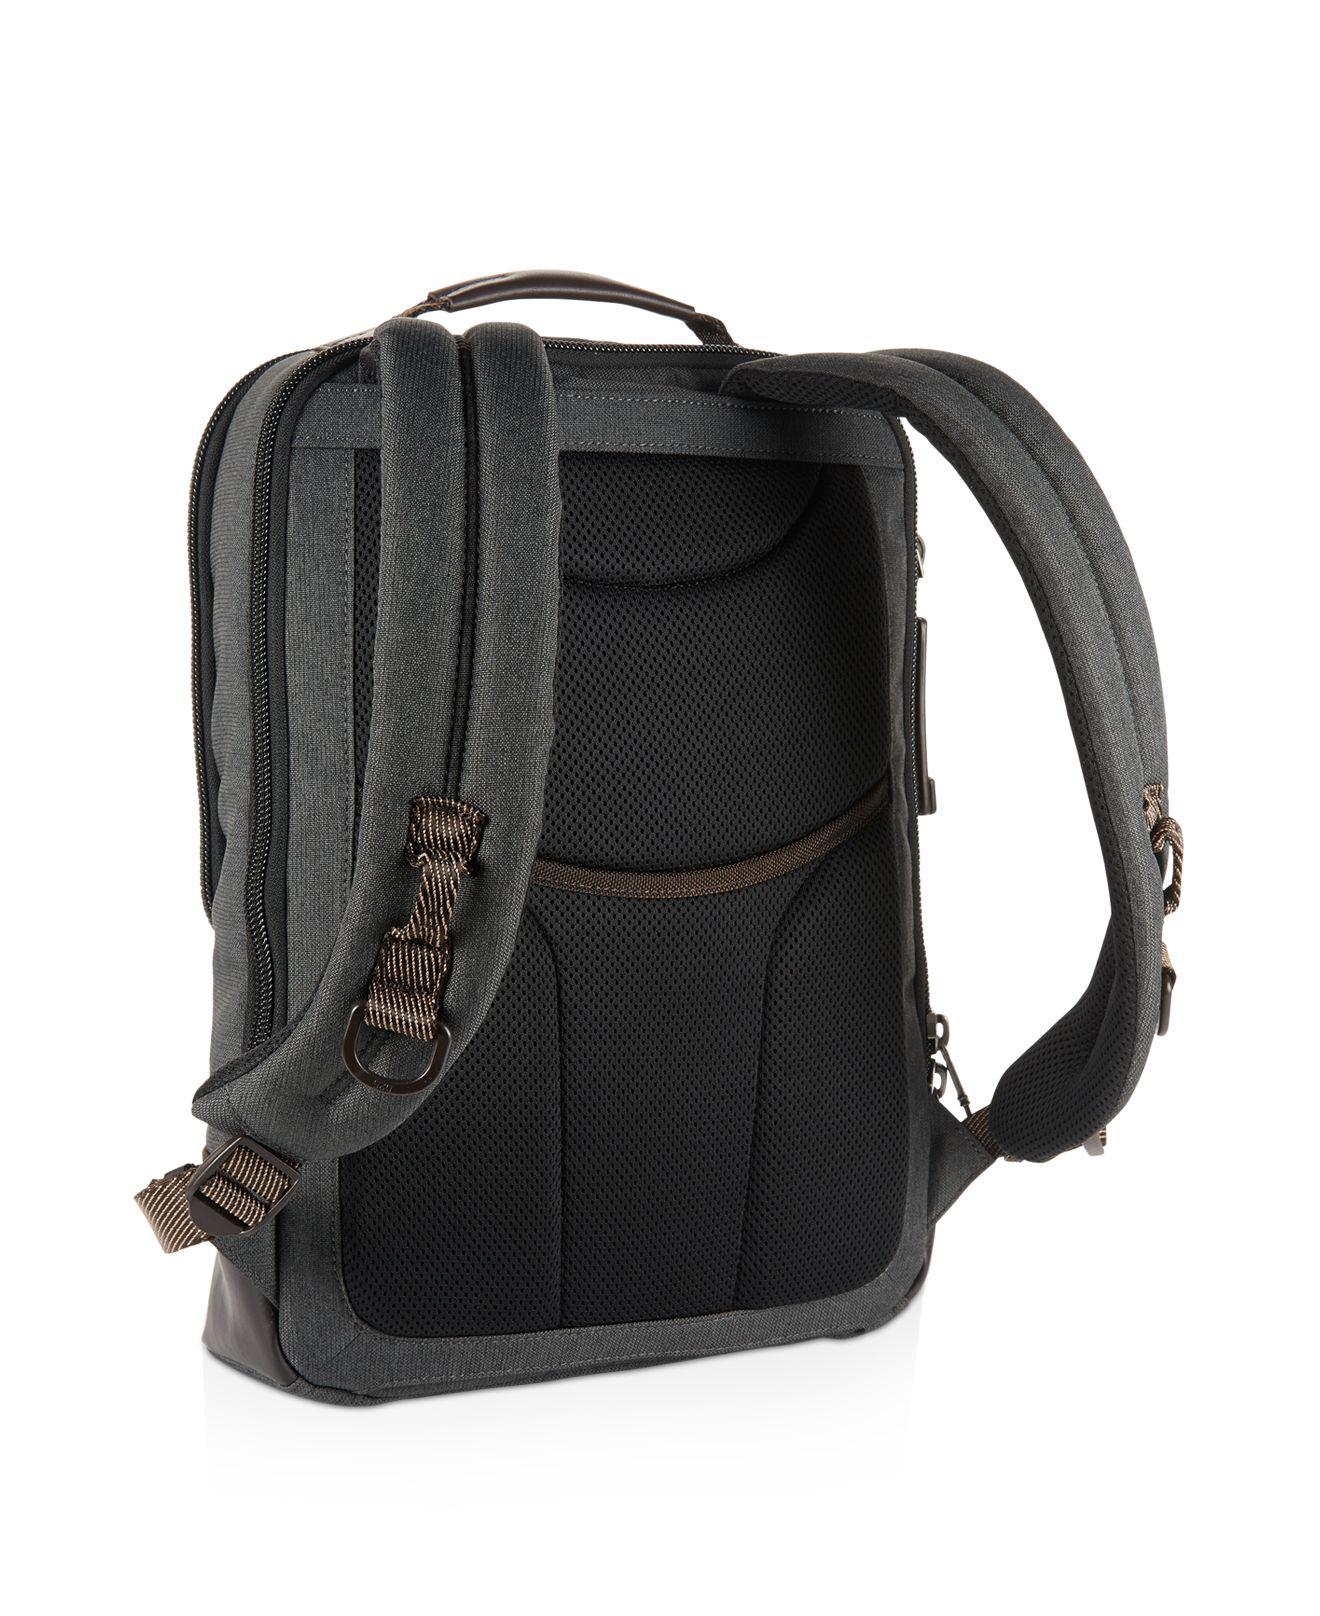 Lyst - Tumi Dover Backpack in Gray for Men